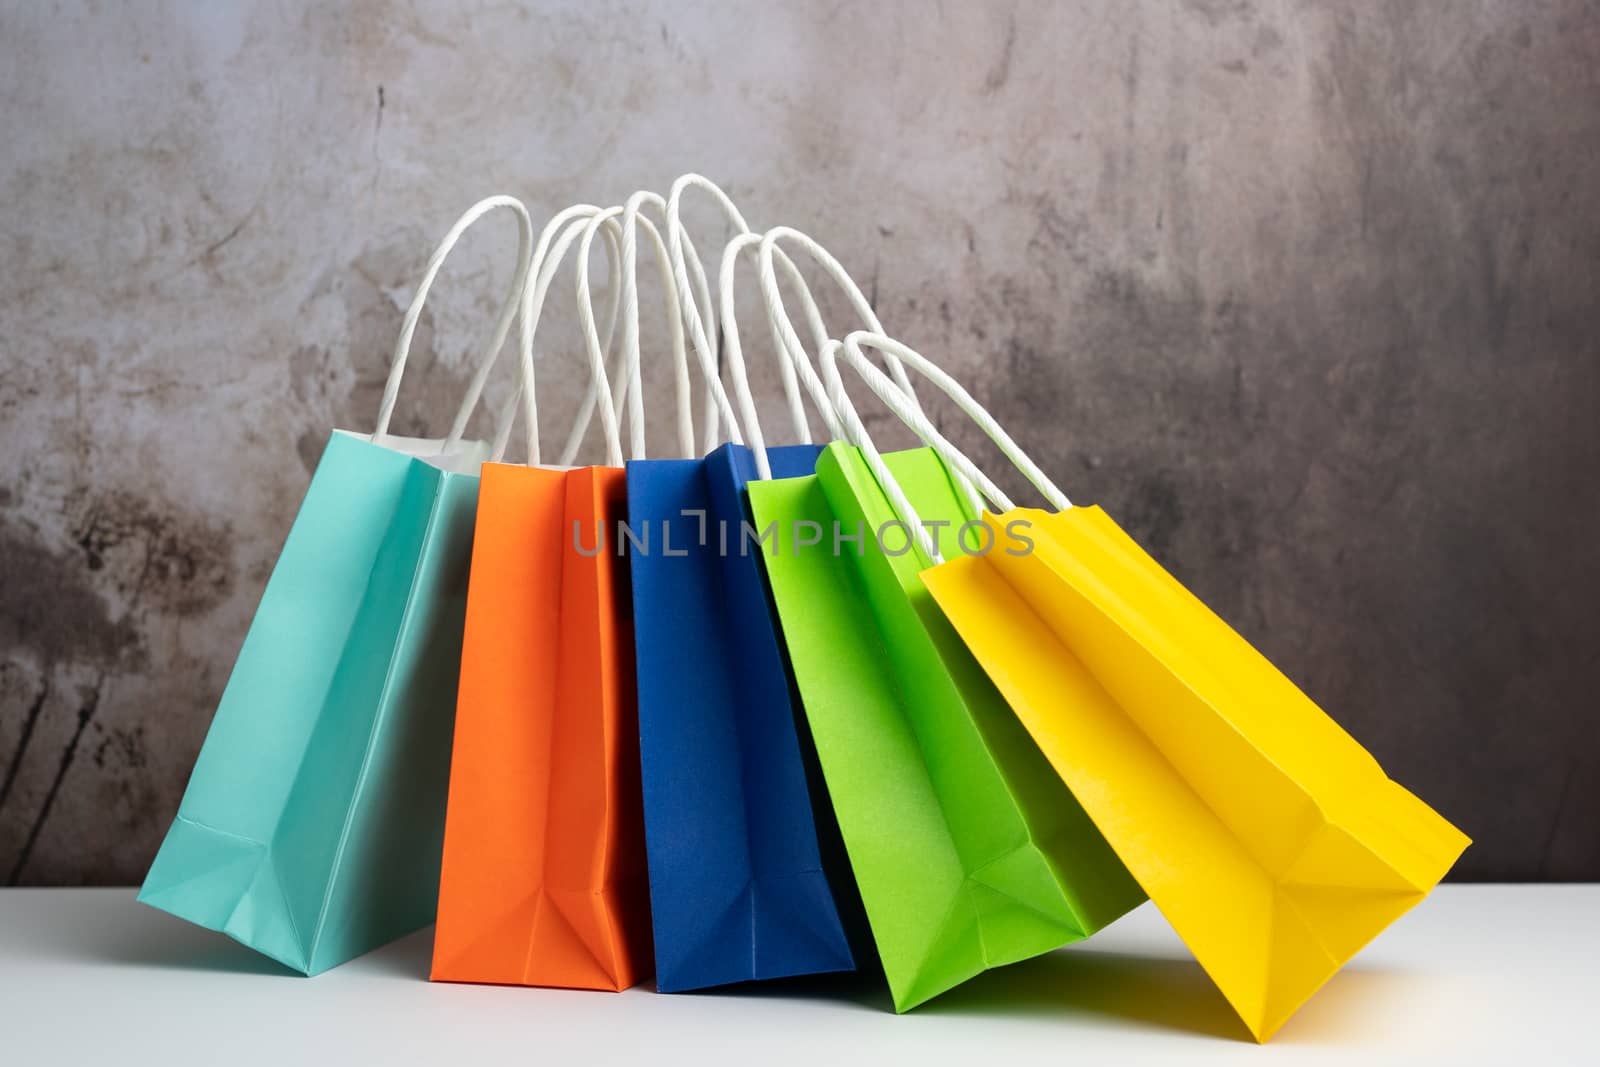 Five colorful gift or shopping bags against grunge background